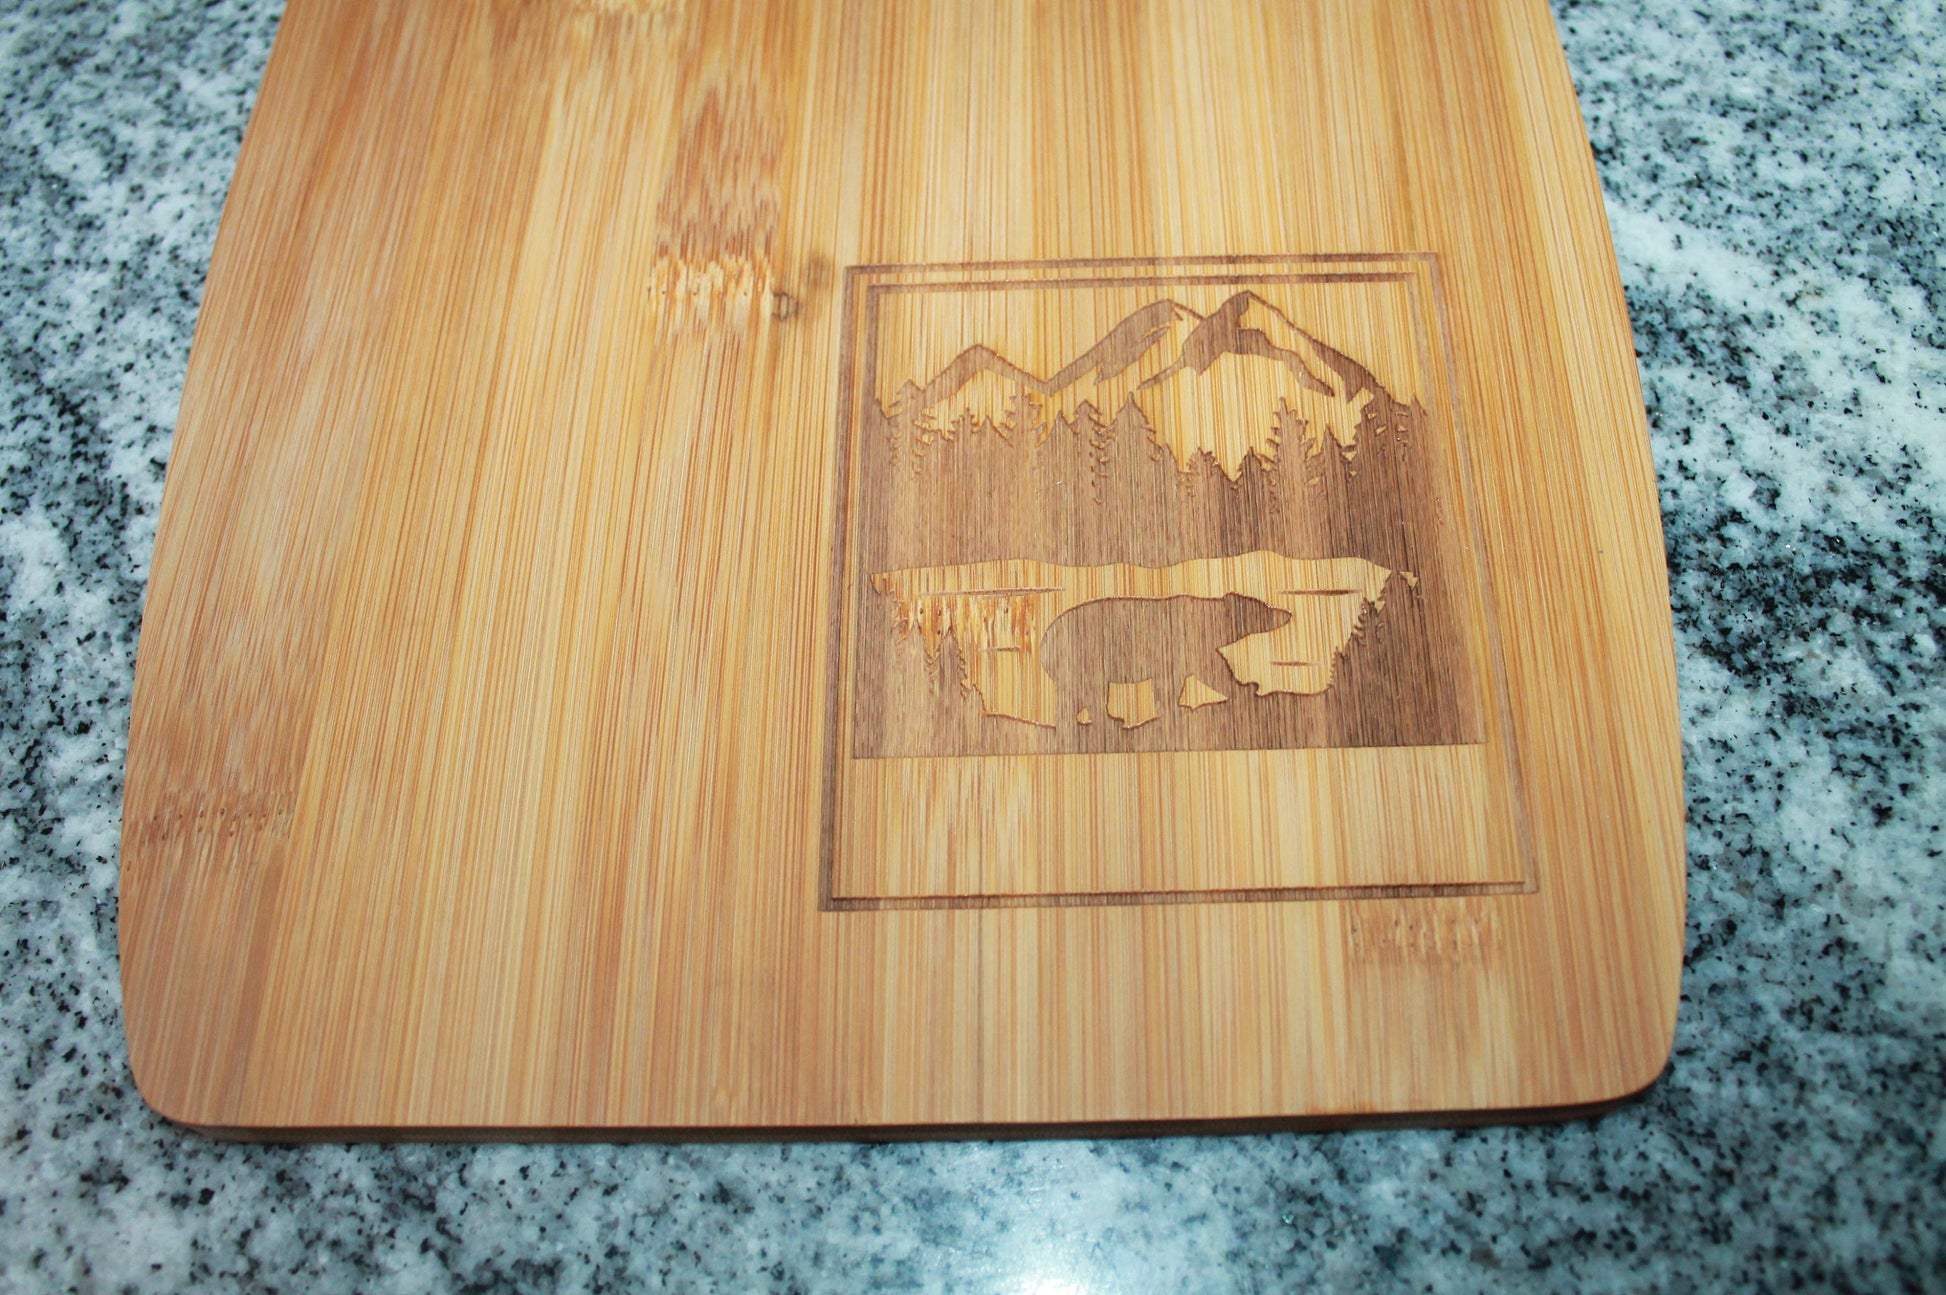 Wooden Engraved Cutting Board Bear Mountain Scene Cabin Rustic Country Vacation Camping Camper Rv Decor Culinary Hardwood Gift BBQ